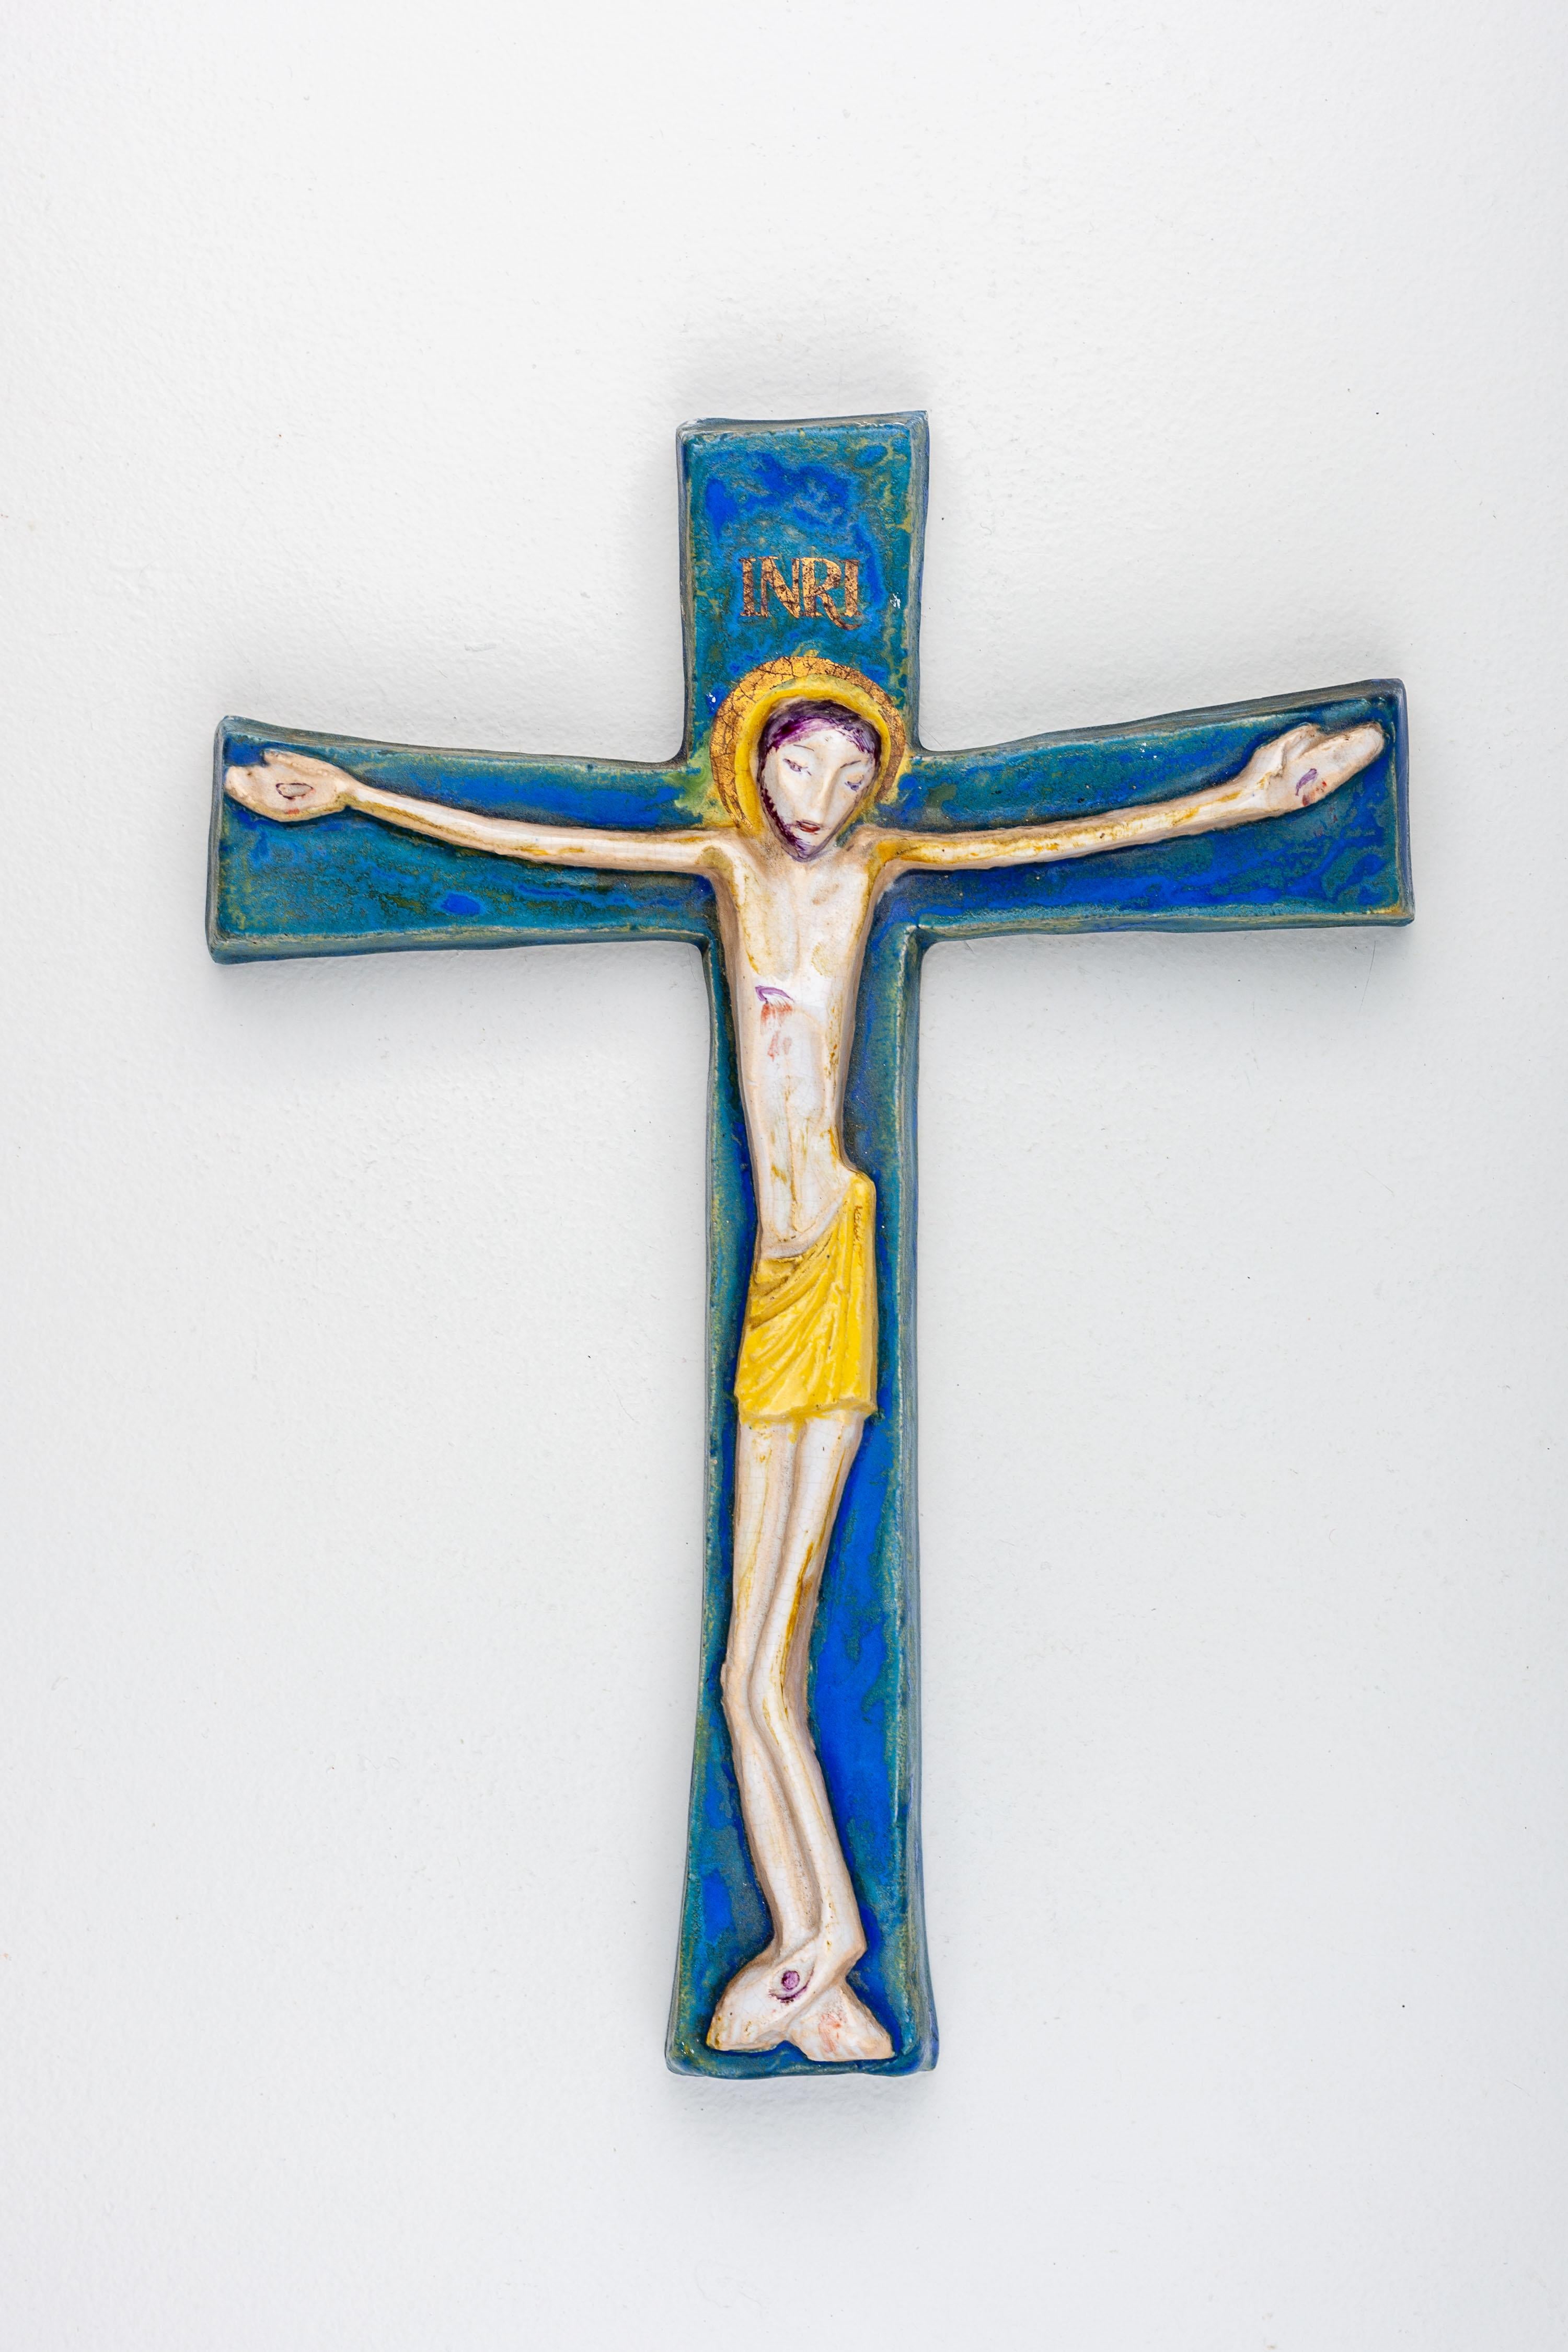 Modernist Cobalt Blue and Gold Wall Cross - European Studio Pottery Masterpiece In Good Condition For Sale In Chicago, IL